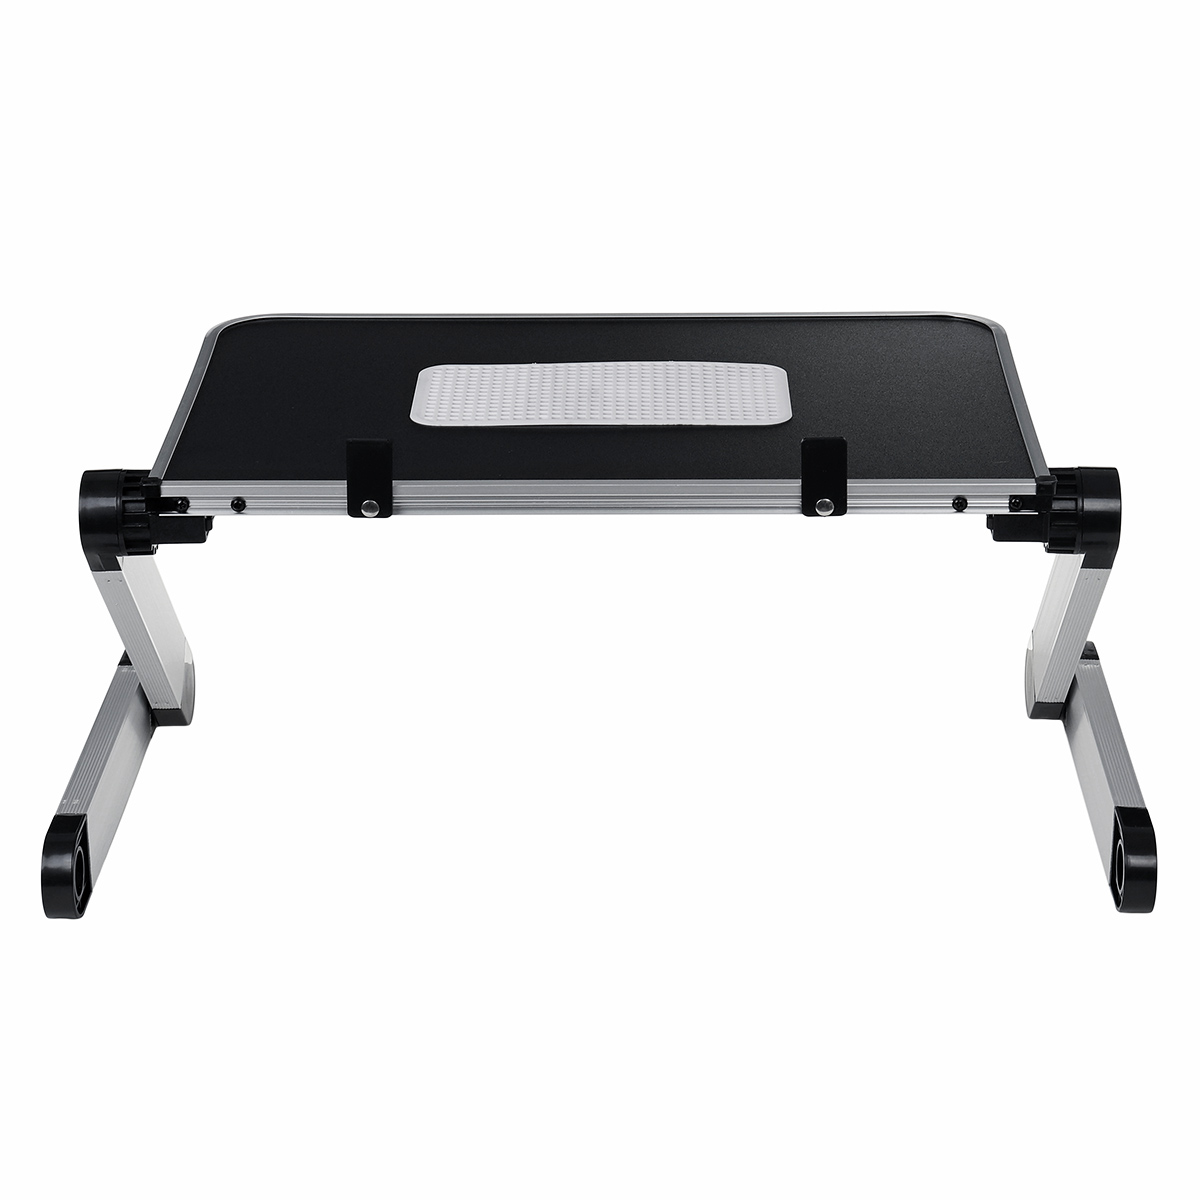 5026cm-Enlarge-Foldable-with-Cooling-Fan-Hole-Aluminum-Laptop-Computer-Desk-Table-TV-Bed-Computer-Ma-1700717-12